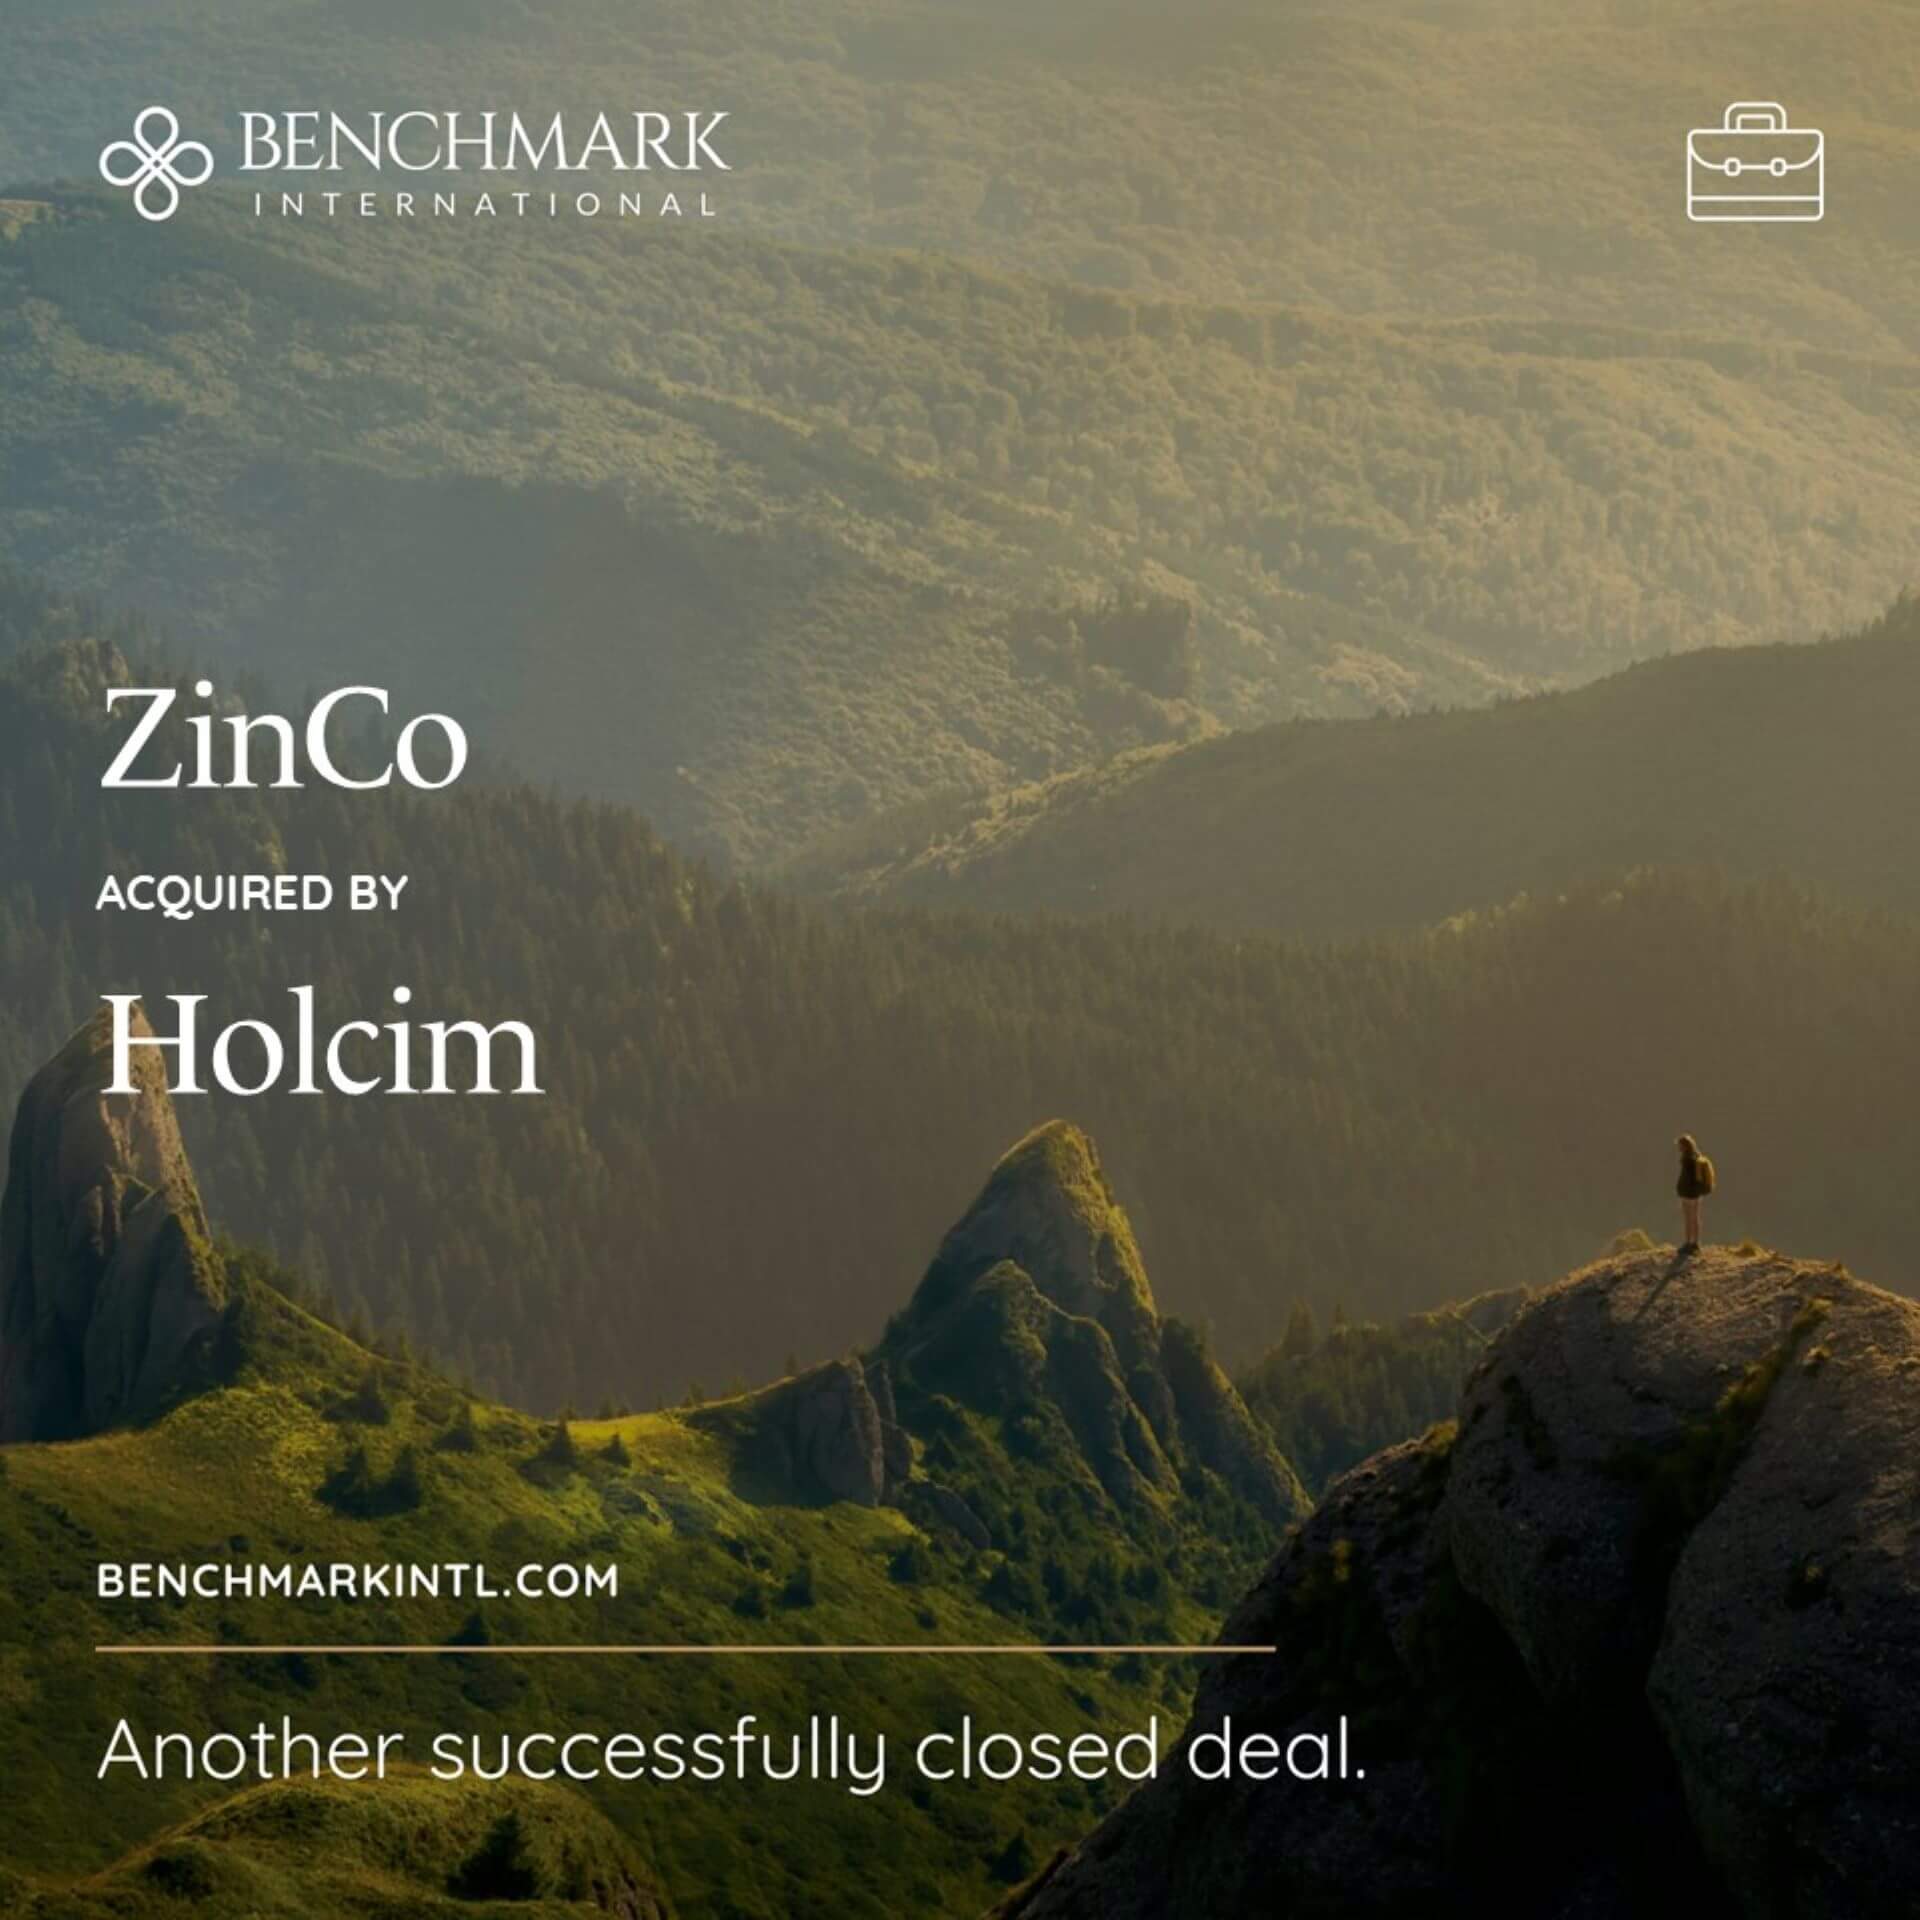 ZinCo acquired by Holcim